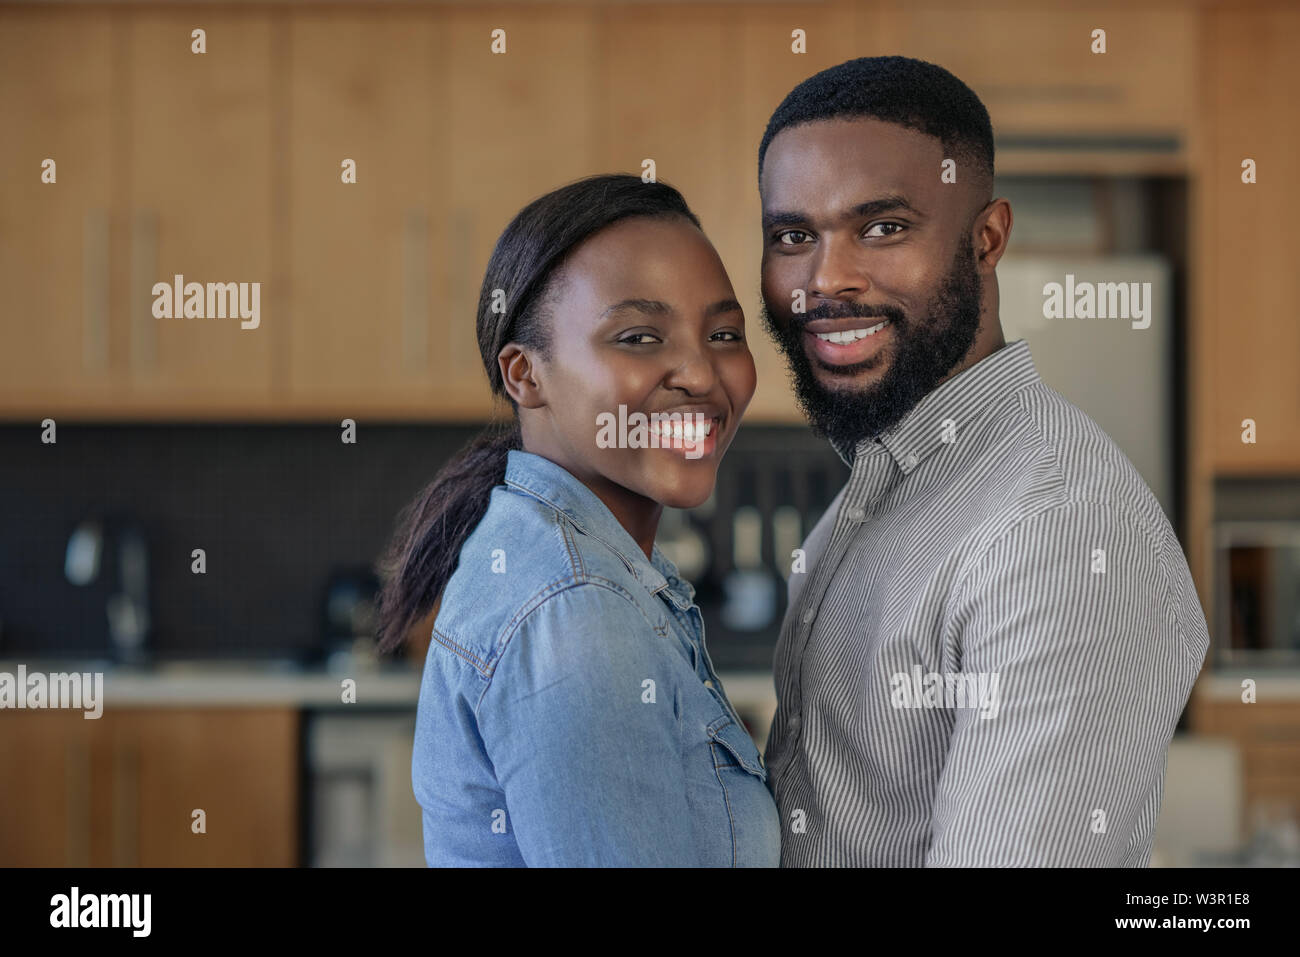 Affectionate young African American couple standing close together at home Stock Photo